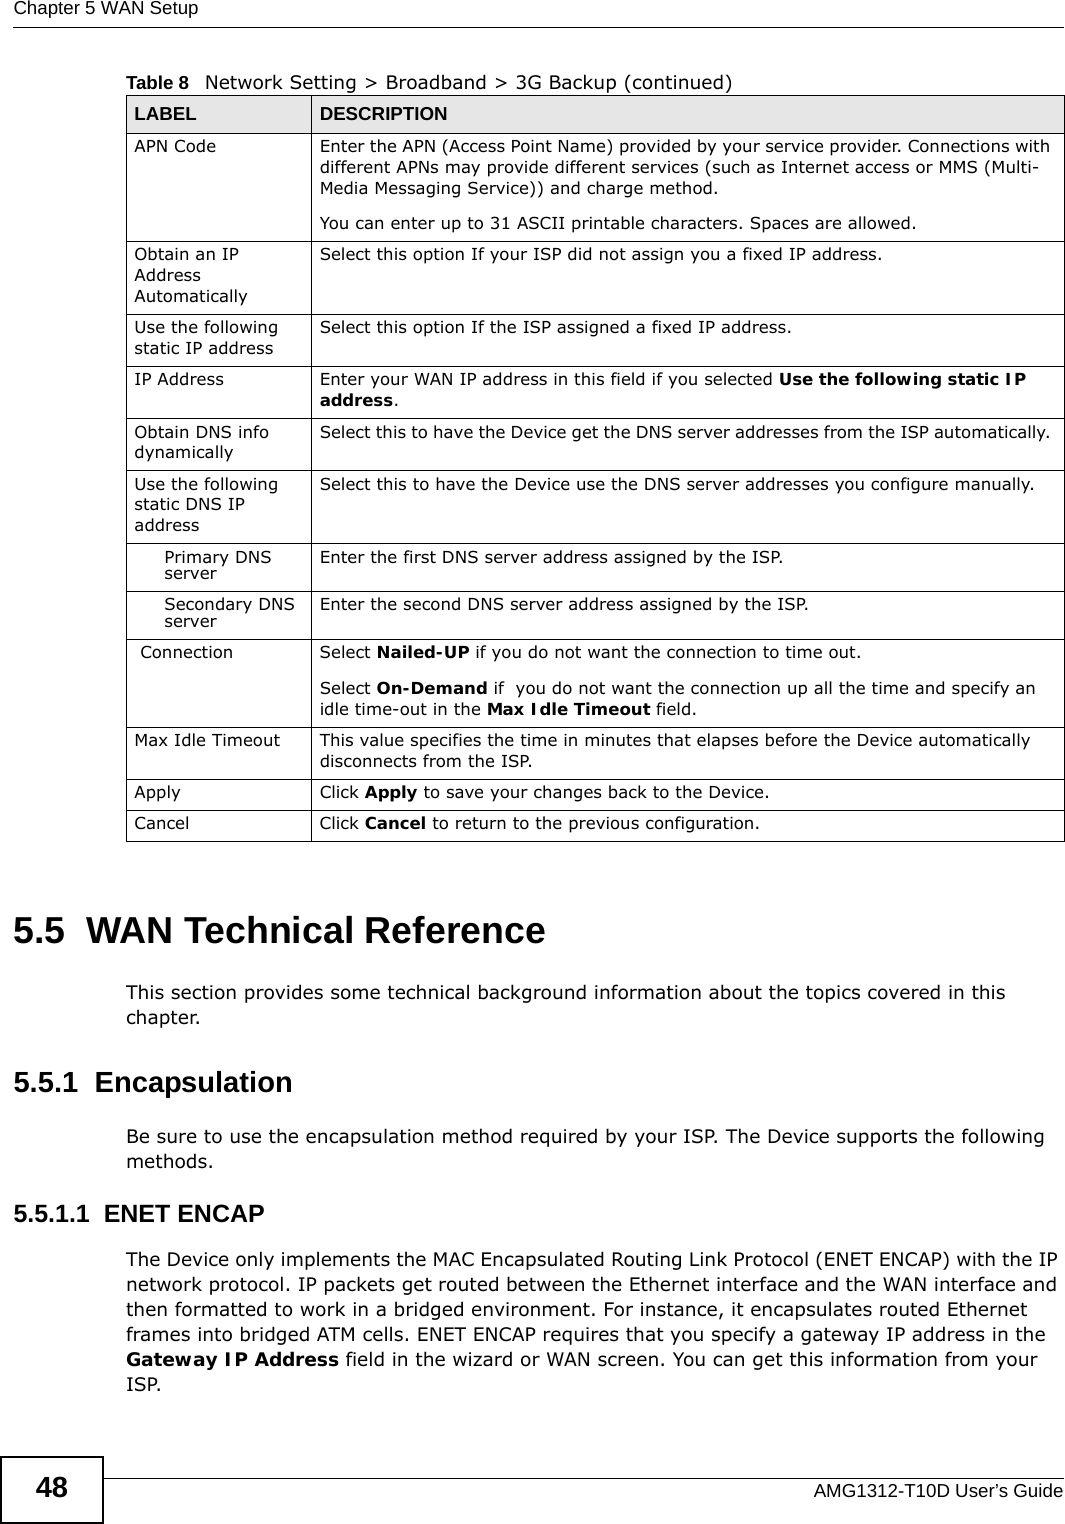 Chapter 5 WAN SetupAMG1312-T10D User’s Guide485.5  WAN Technical ReferenceThis section provides some technical background information about the topics covered in this chapter.5.5.1  EncapsulationBe sure to use the encapsulation method required by your ISP. The Device supports the following methods.5.5.1.1  ENET ENCAPThe Device only implements the MAC Encapsulated Routing Link Protocol (ENET ENCAP) with the IP network protocol. IP packets get routed between the Ethernet interface and the WAN interface and then formatted to work in a bridged environment. For instance, it encapsulates routed Ethernet frames into bridged ATM cells. ENET ENCAP requires that you specify a gateway IP address in the Gateway IP Address field in the wizard or WAN screen. You can get this information from your ISP.APN Code Enter the APN (Access Point Name) provided by your service provider. Connections with different APNs may provide different services (such as Internet access or MMS (Multi-Media Messaging Service)) and charge method.You can enter up to 31 ASCII printable characters. Spaces are allowed.Obtain an IP Address AutomaticallySelect this option If your ISP did not assign you a fixed IP address. Use the following static IP addressSelect this option If the ISP assigned a fixed IP address. IP Address Enter your WAN IP address in this field if you selected Use the following static IP address. Obtain DNS info dynamically  Select this to have the Device get the DNS server addresses from the ISP automatically. Use the following static DNS IP addressSelect this to have the Device use the DNS server addresses you configure manually.Primary DNS server Enter the first DNS server address assigned by the ISP.Secondary DNS server Enter the second DNS server address assigned by the ISP. Connection Select Nailed-UP if you do not want the connection to time out.Select On-Demand if  you do not want the connection up all the time and specify an idle time-out in the Max Idle Timeout field.Max Idle Timeout  This value specifies the time in minutes that elapses before the Device automatically disconnects from the ISP.Apply Click Apply to save your changes back to the Device.Cancel Click Cancel to return to the previous configuration.Table 8   Network Setting &gt; Broadband &gt; 3G Backup (continued)LABEL DESCRIPTION